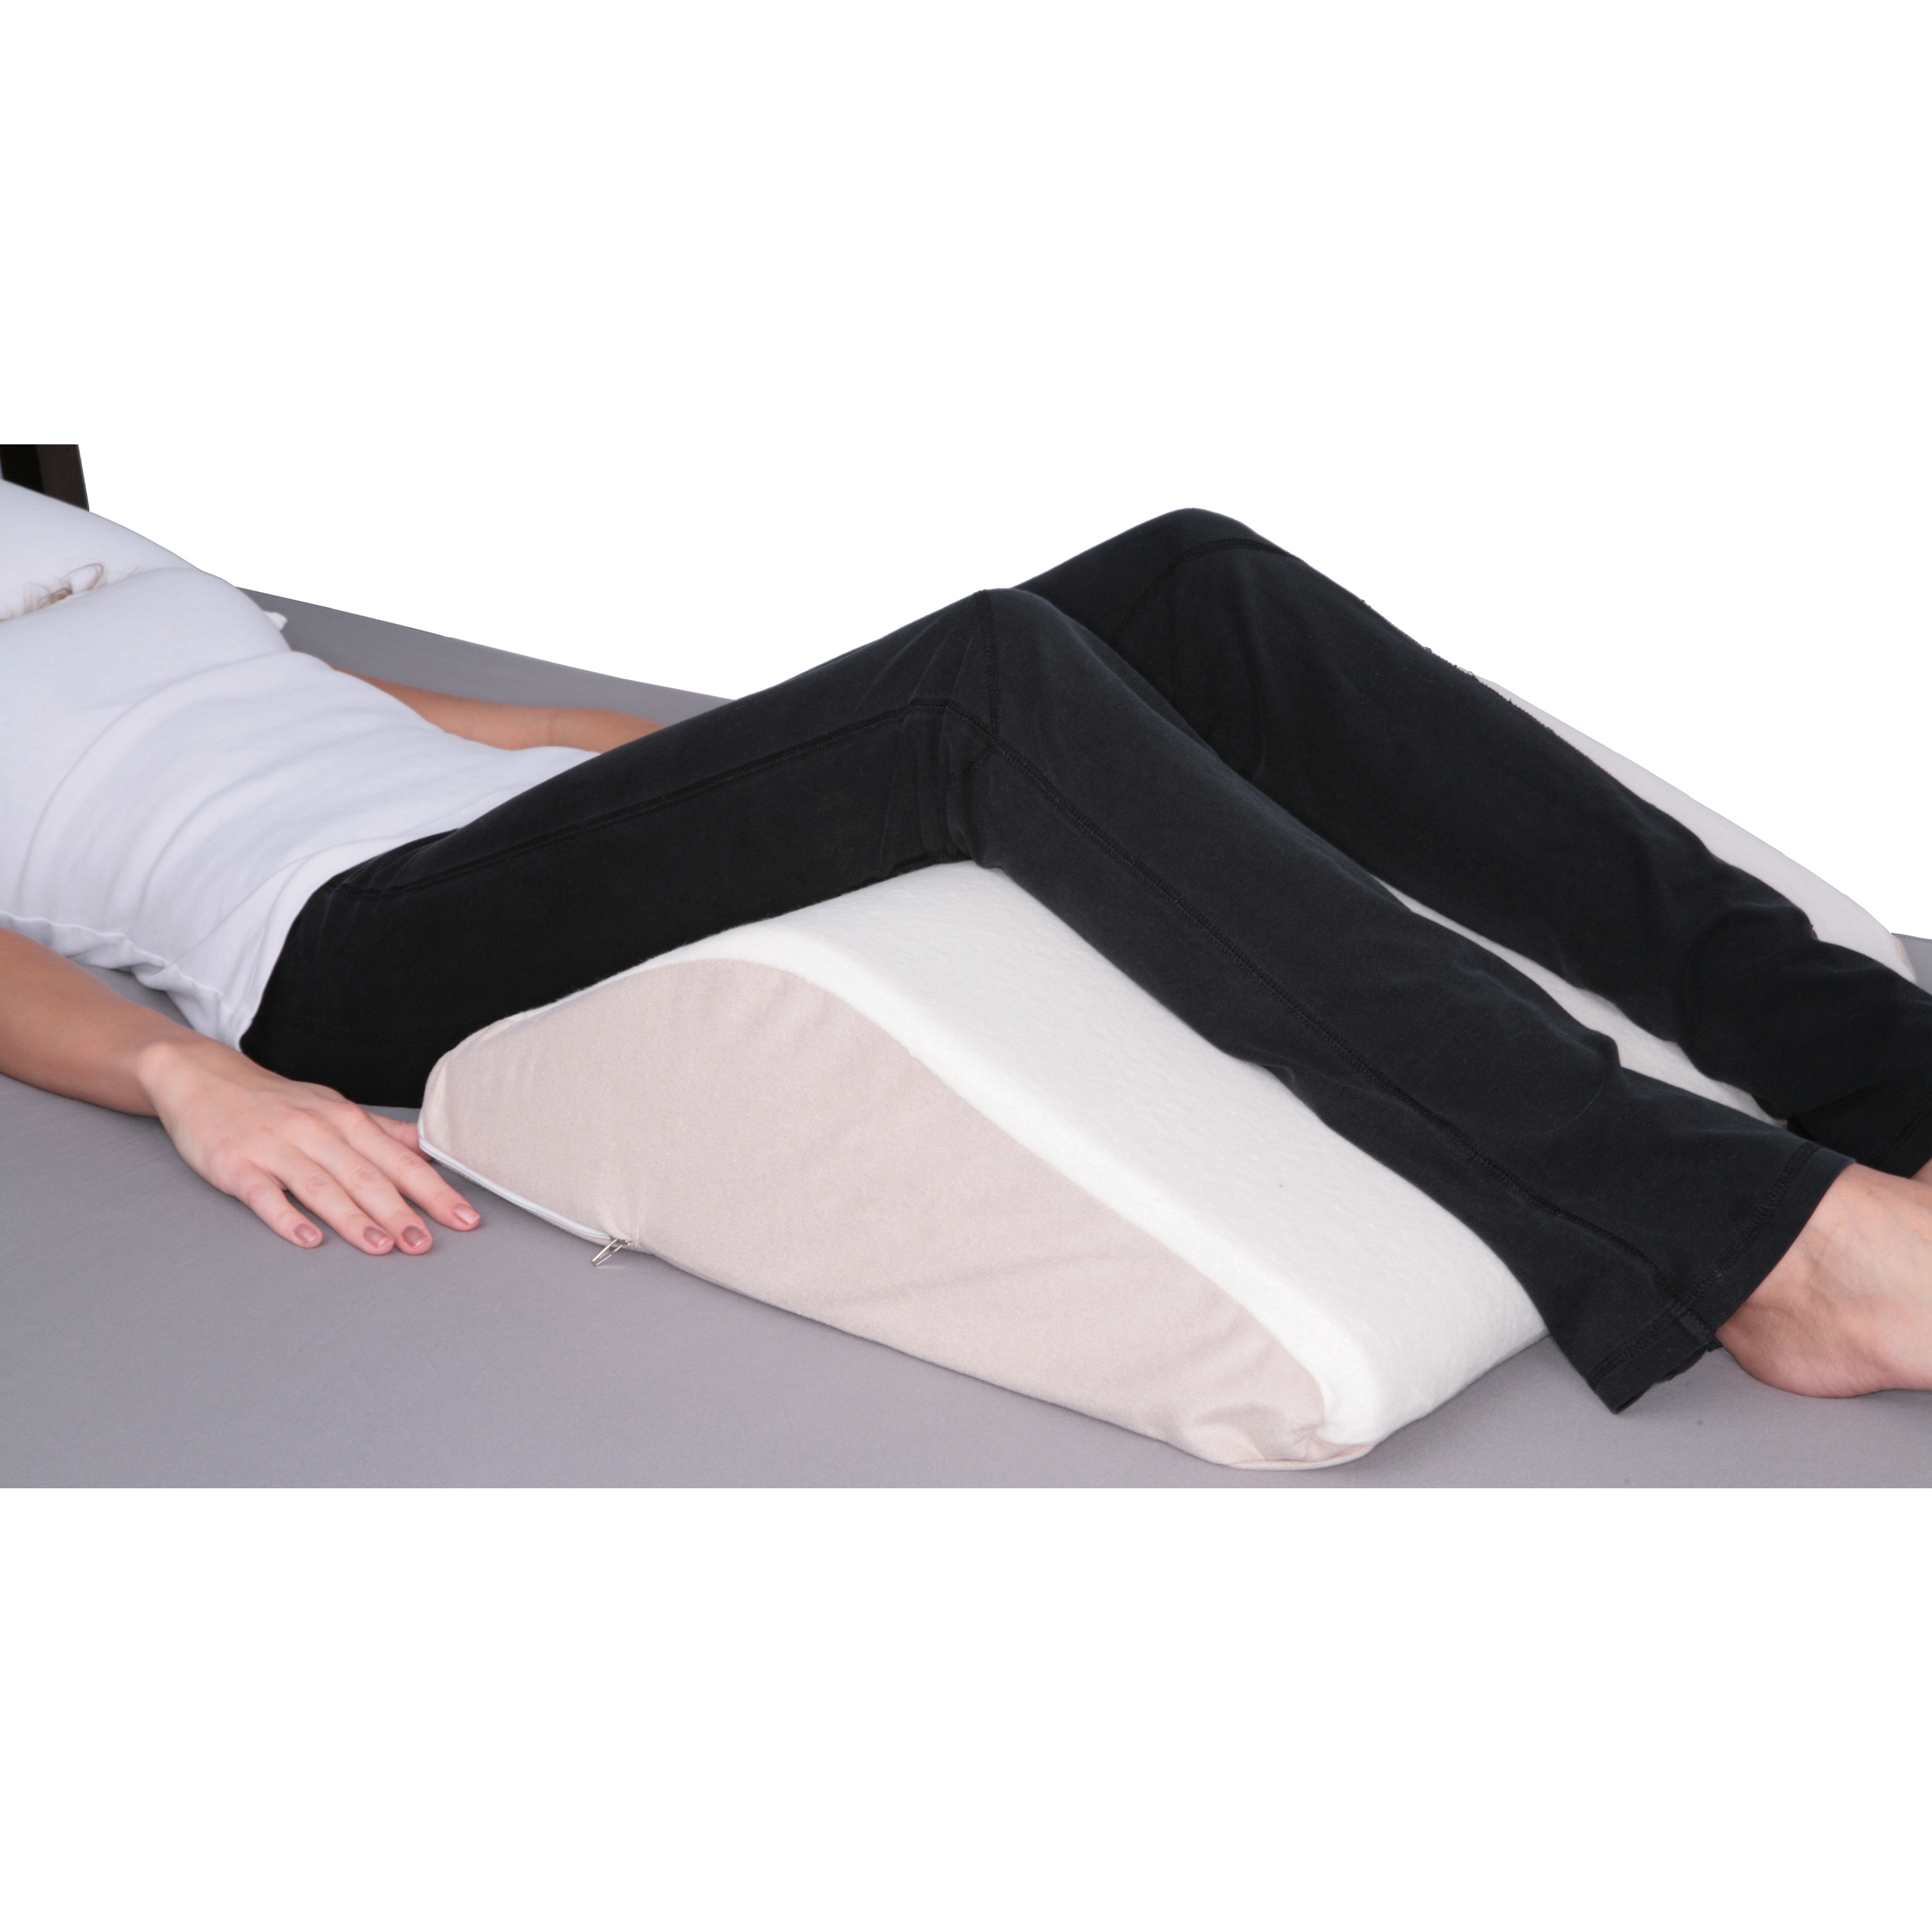 Double-sided Grooved Memory Foam Leg Support Pillow - White - Bed Bath &  Beyond - 33364014